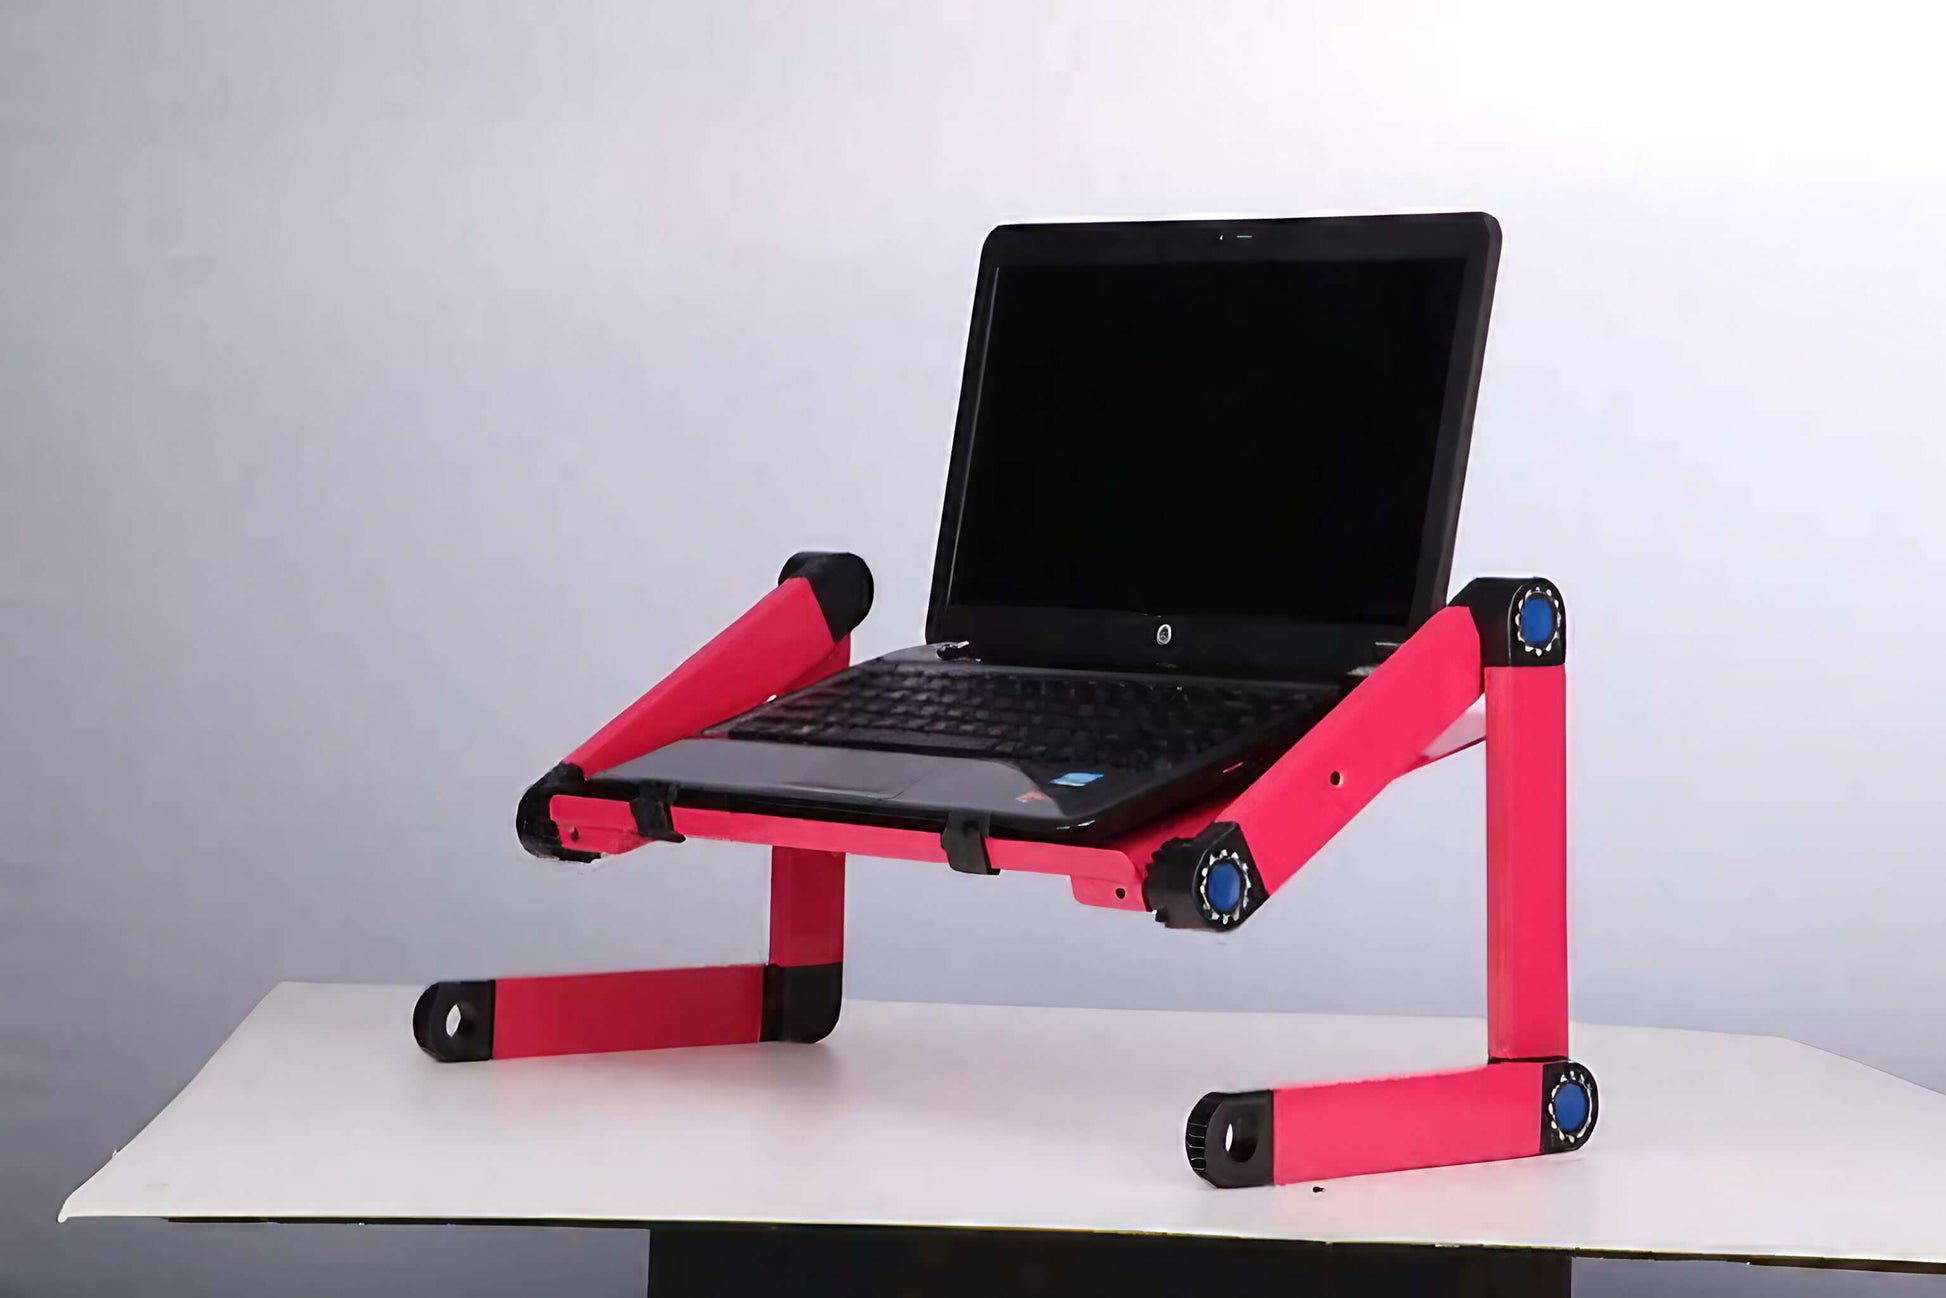 Get the Laptop Foldable Stand Computer Accessories at Malones Specialty Store for a good price